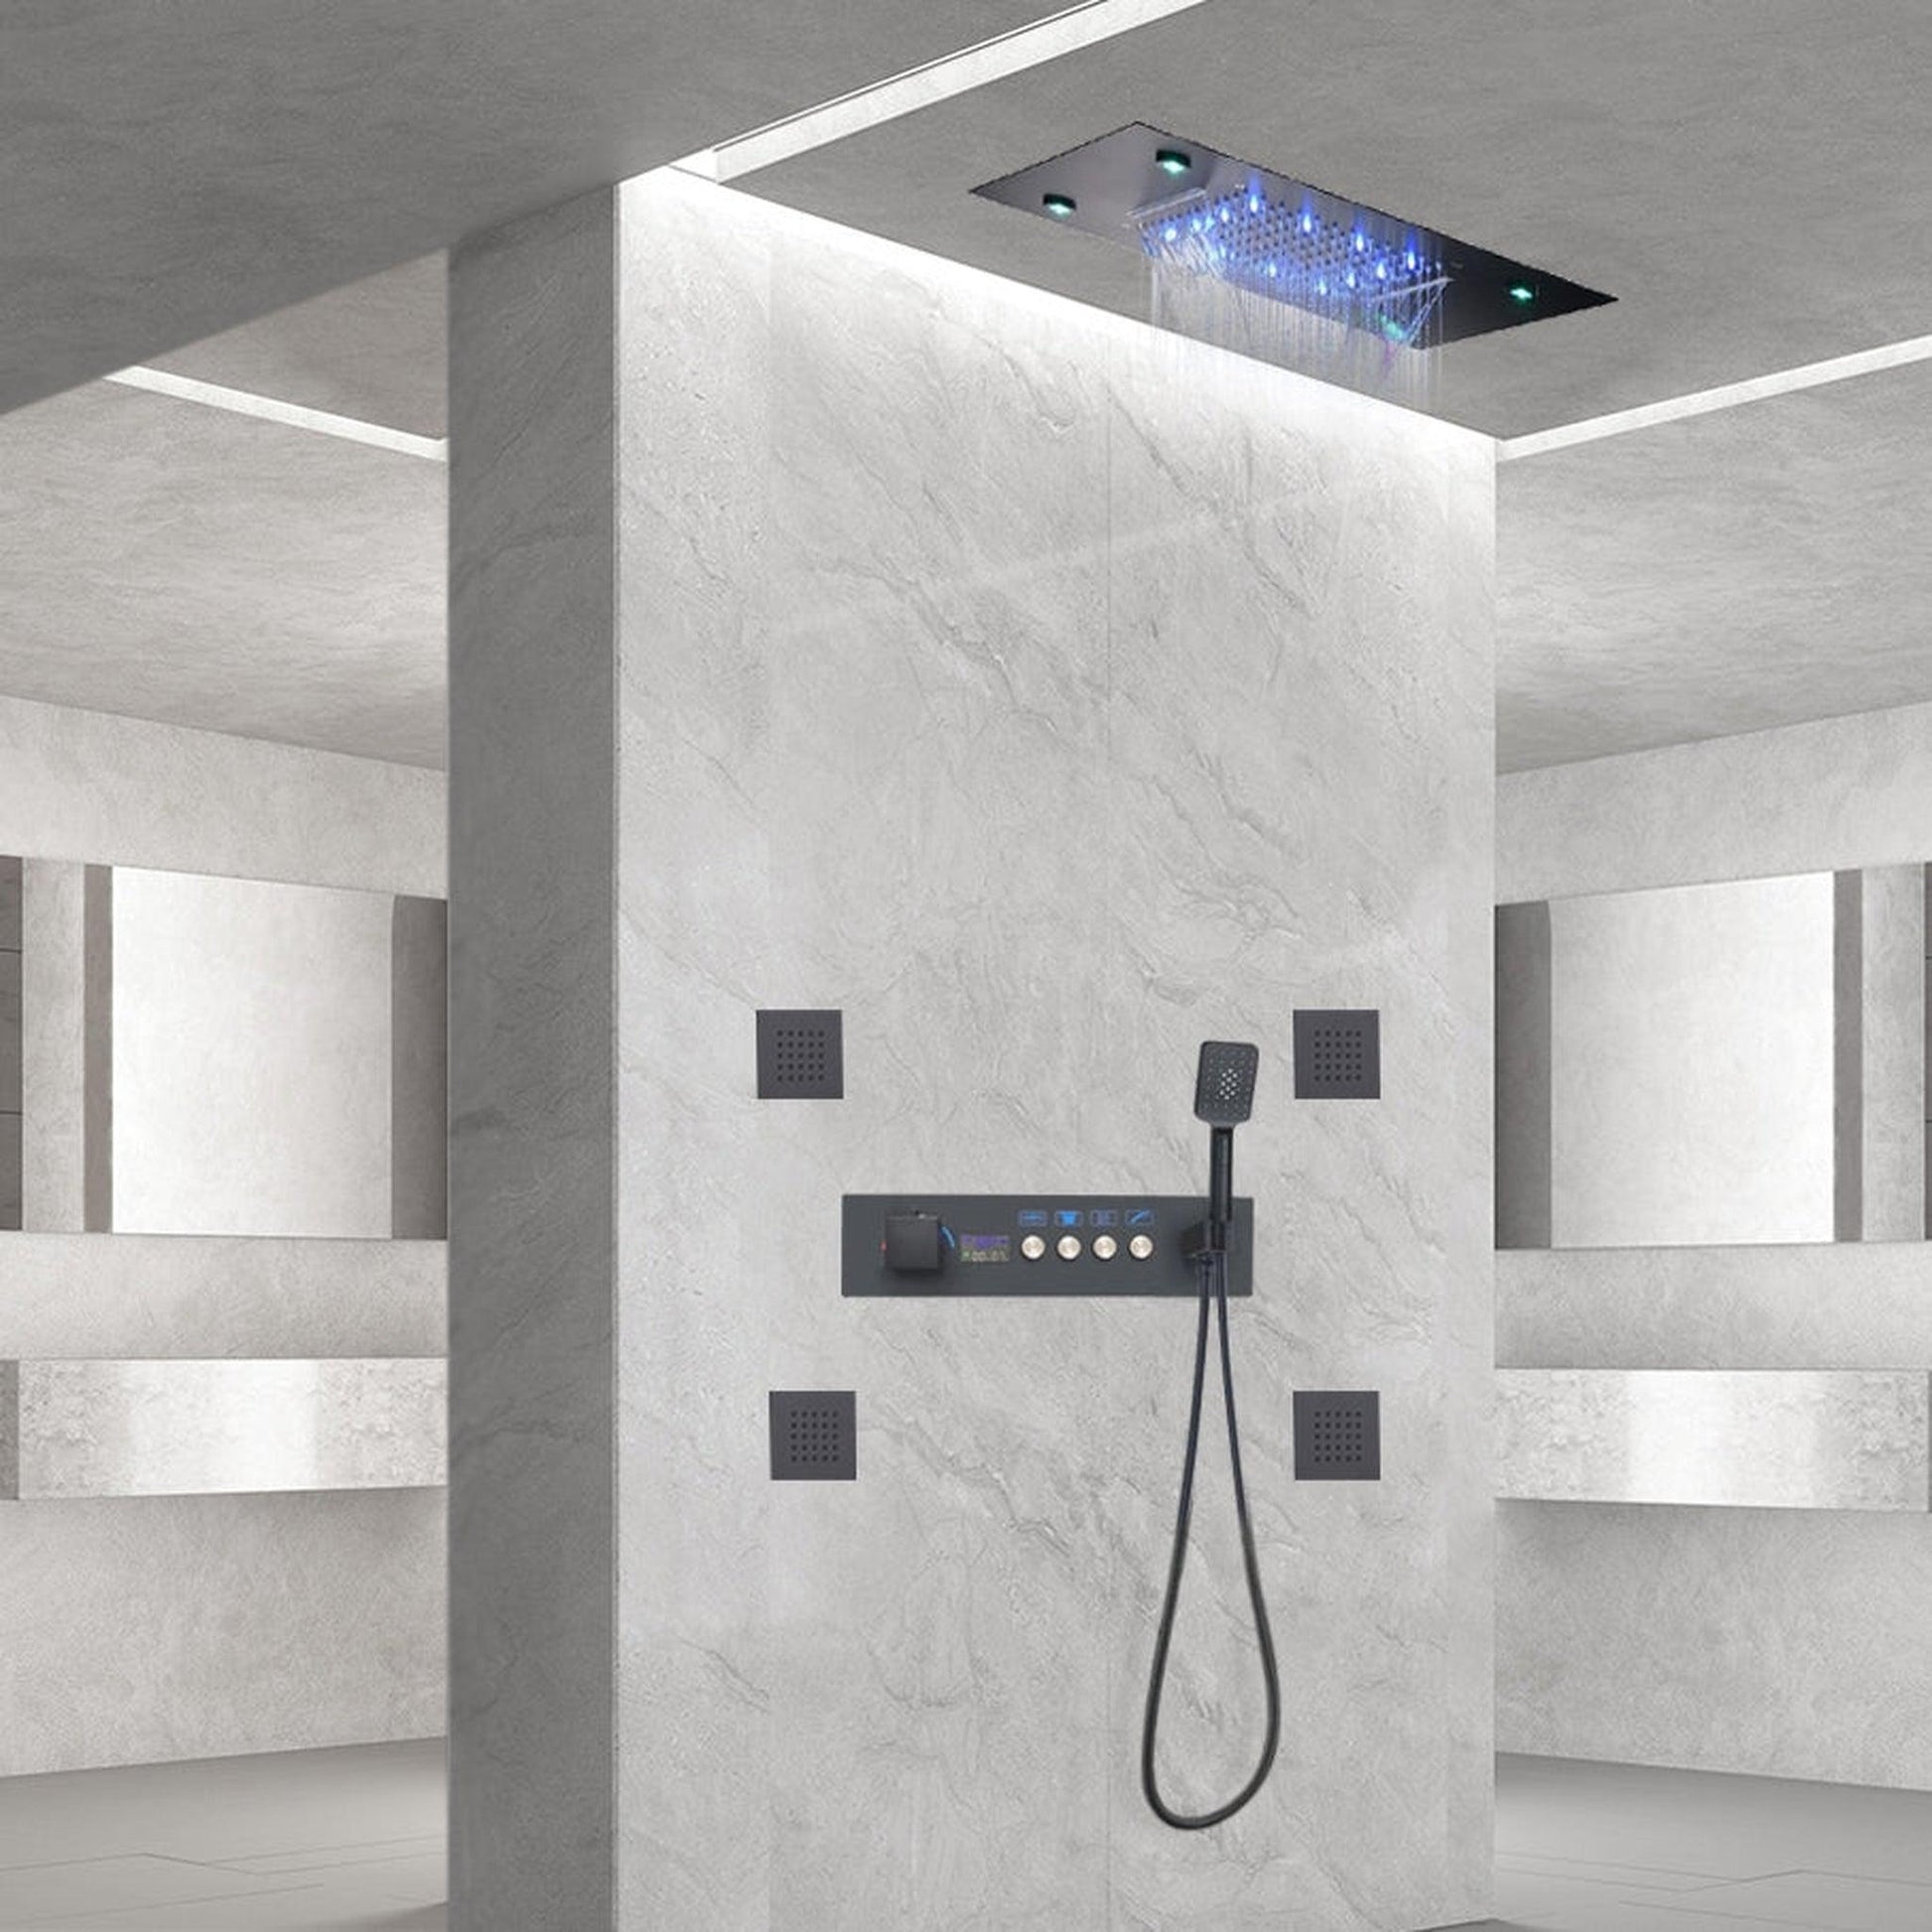 Fontana Cagliari Matte Black Recessed Ceiling Mounted Thermostatic LED Waterfall Rainfall Shower System With 6-Body Jets and Hand Shower